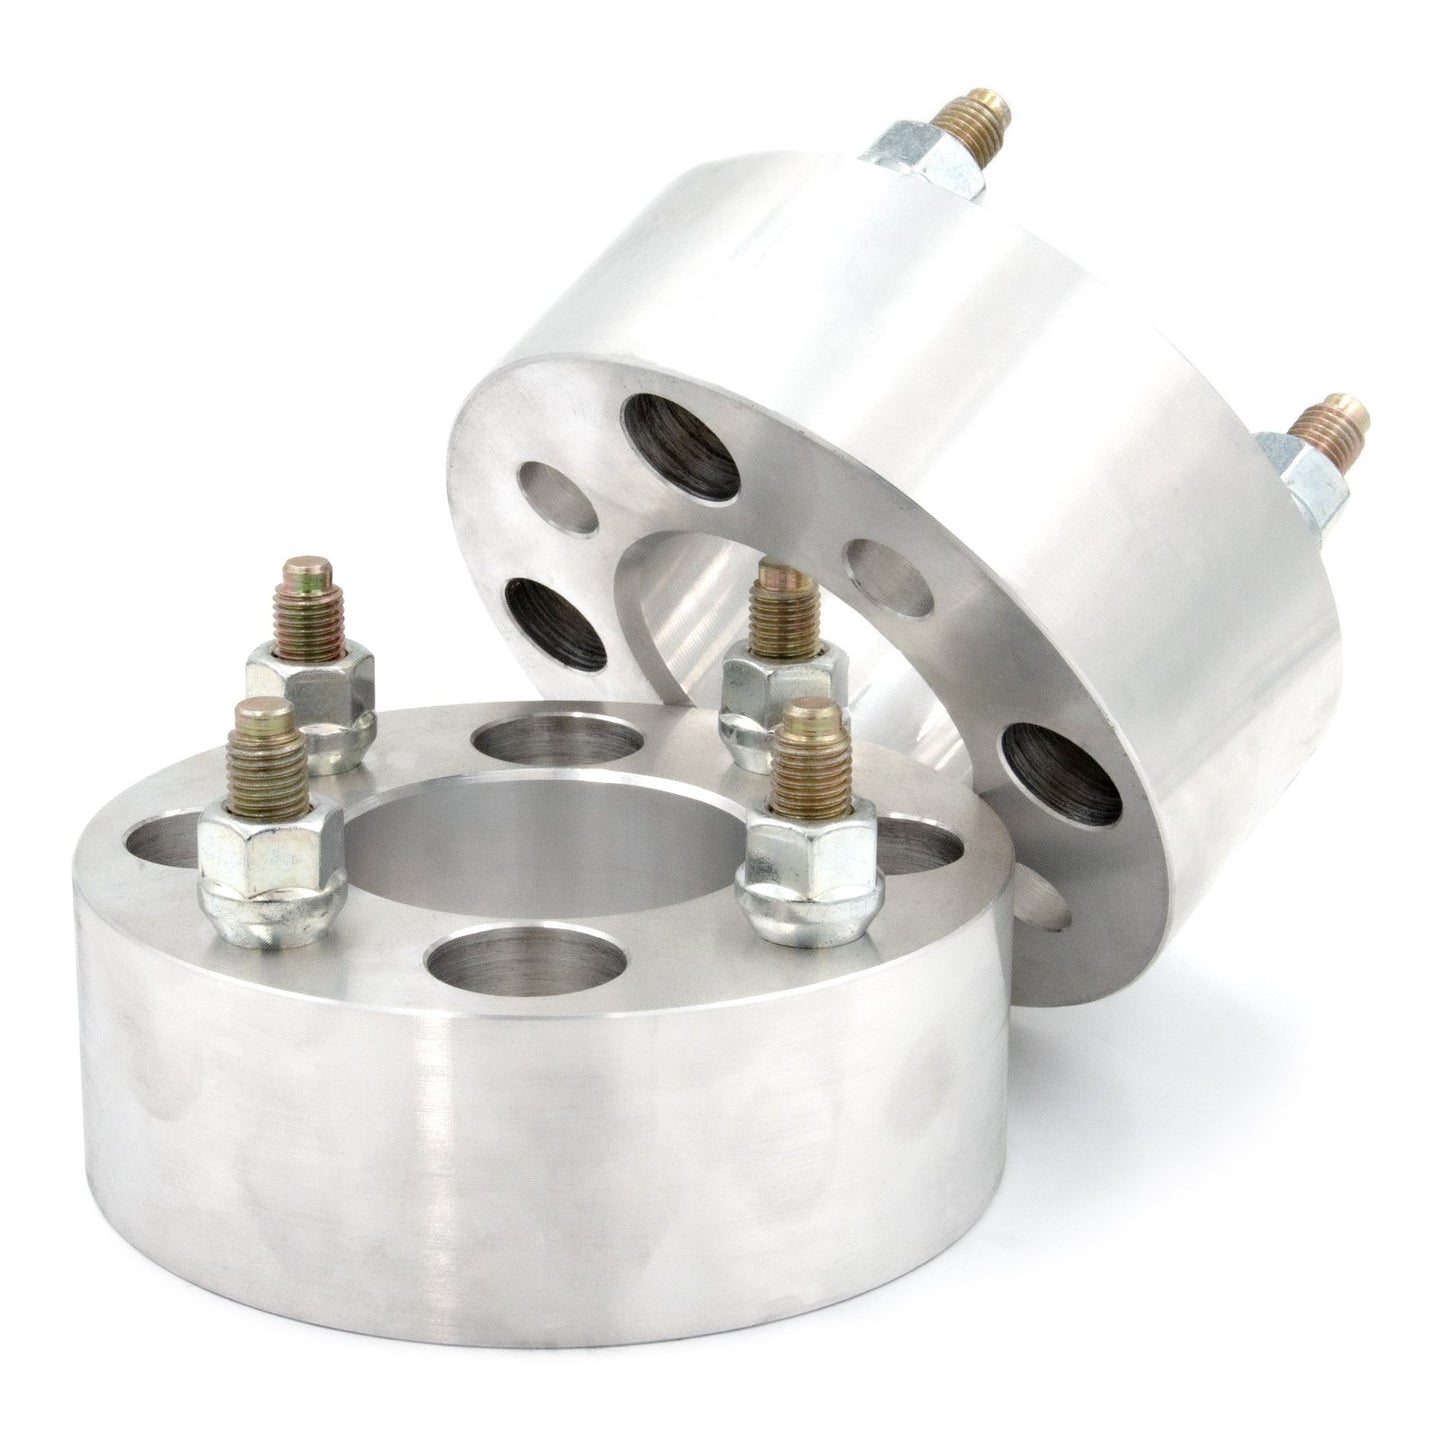 4x115 to 4x110 Wheel Spacer/Adapter - Thickness: 3/4"- 4"